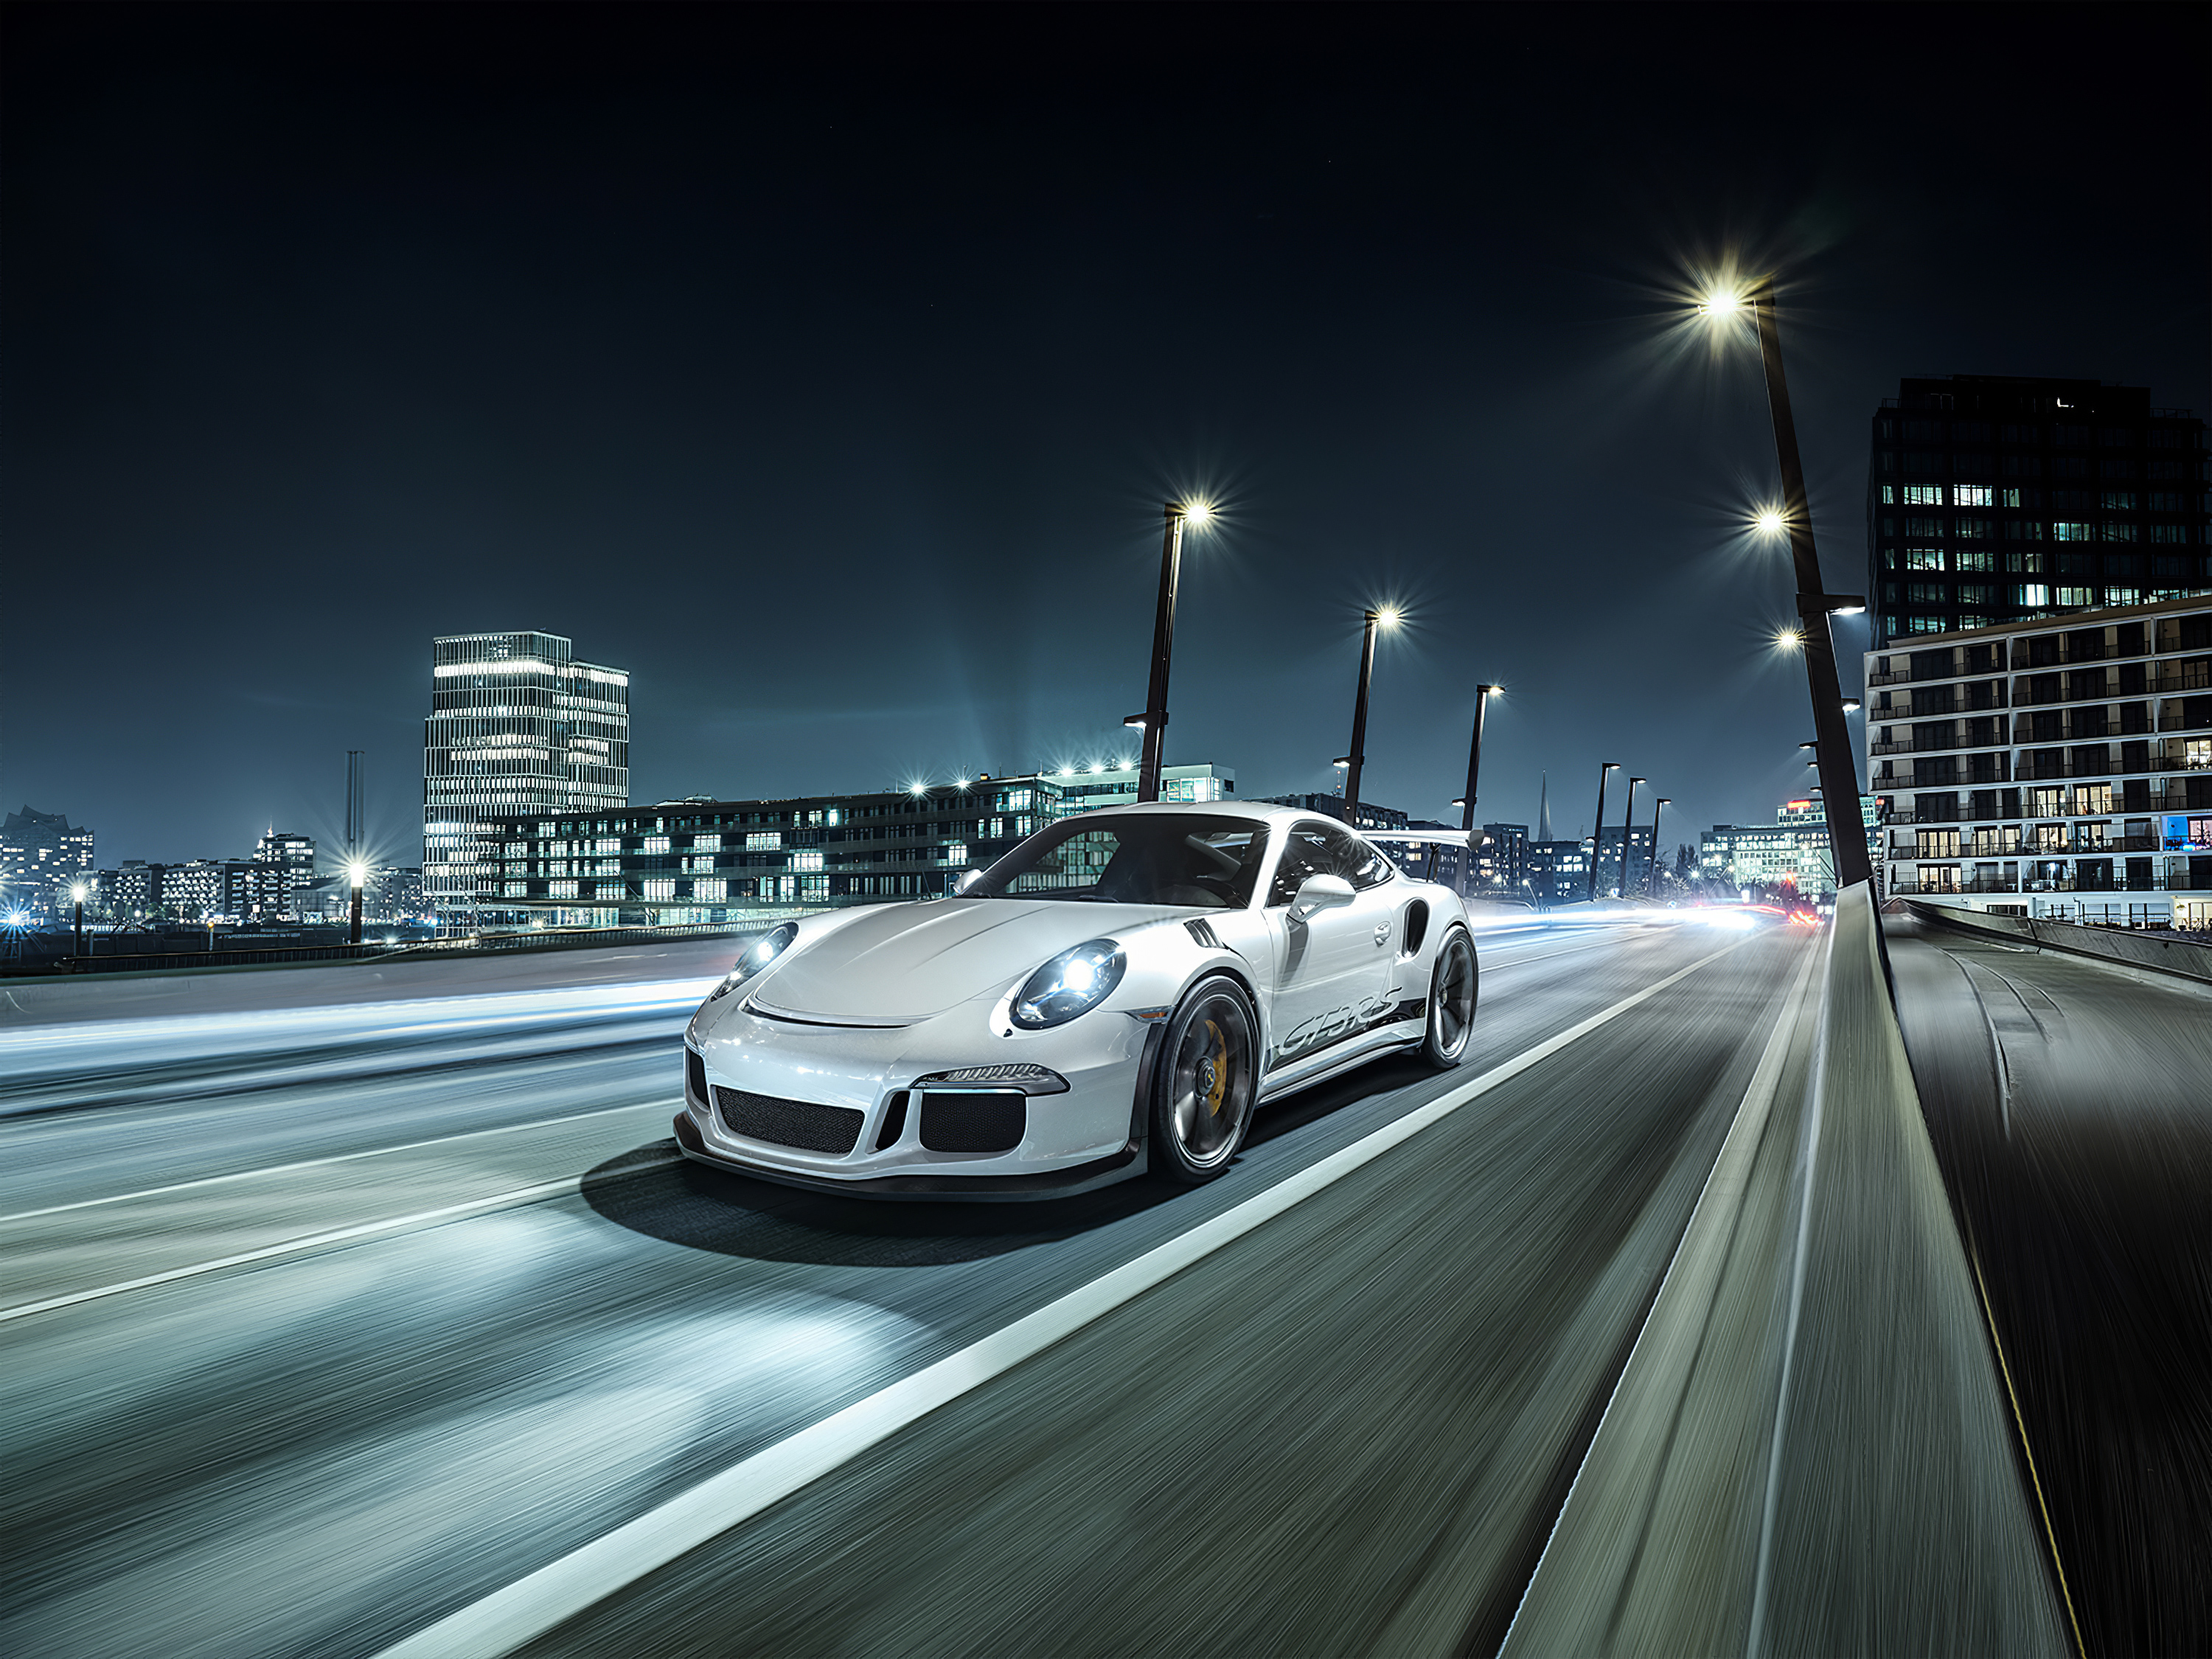 A picture of a white Porsche driving through a city at night.